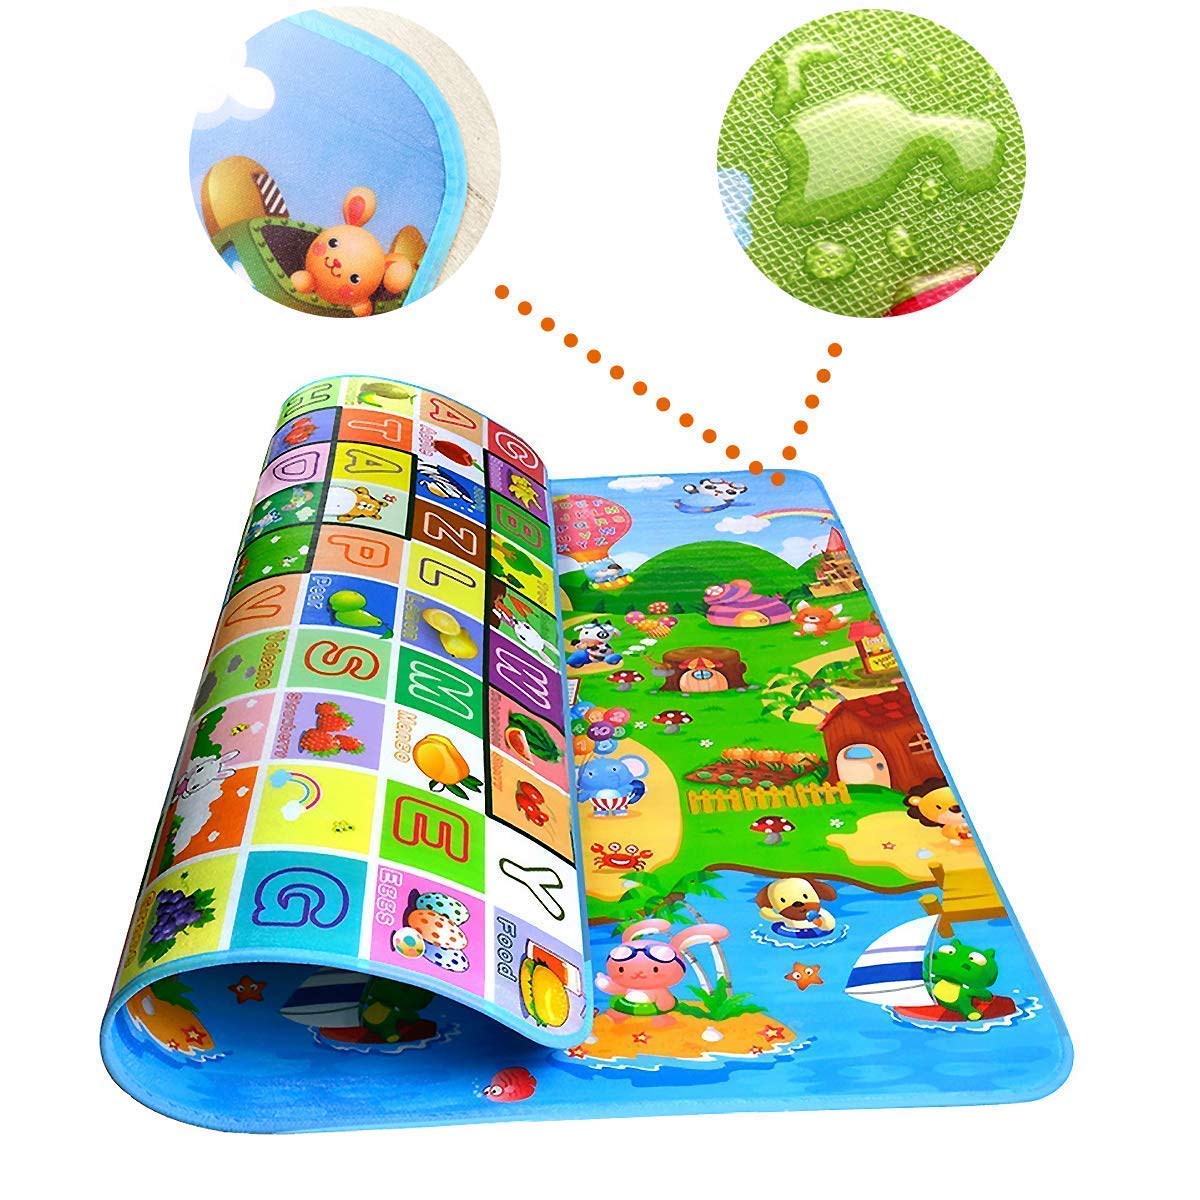 Baby Play Mat,Baby Care Foam Floor Reversible Kids Crawling Mat for Playing, Waterproof Play Game Mat for Infants Babies and Toddlers